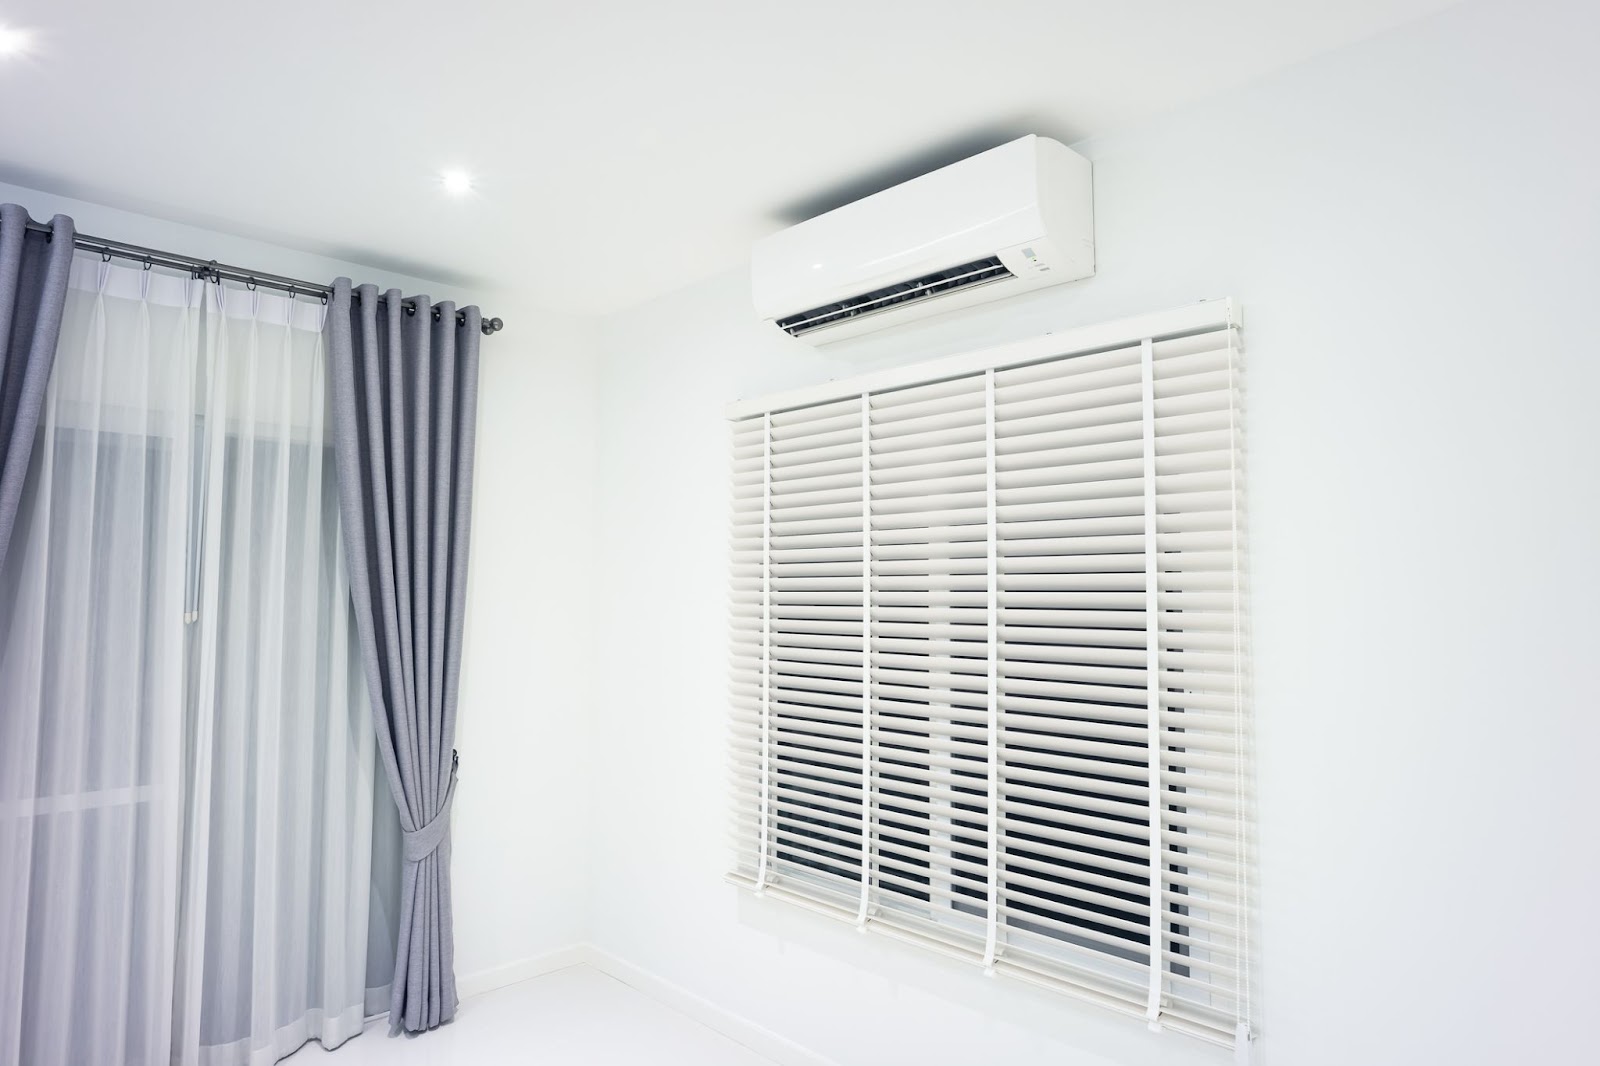 Ductless air conditioner on wall above curtained window in a white clean room